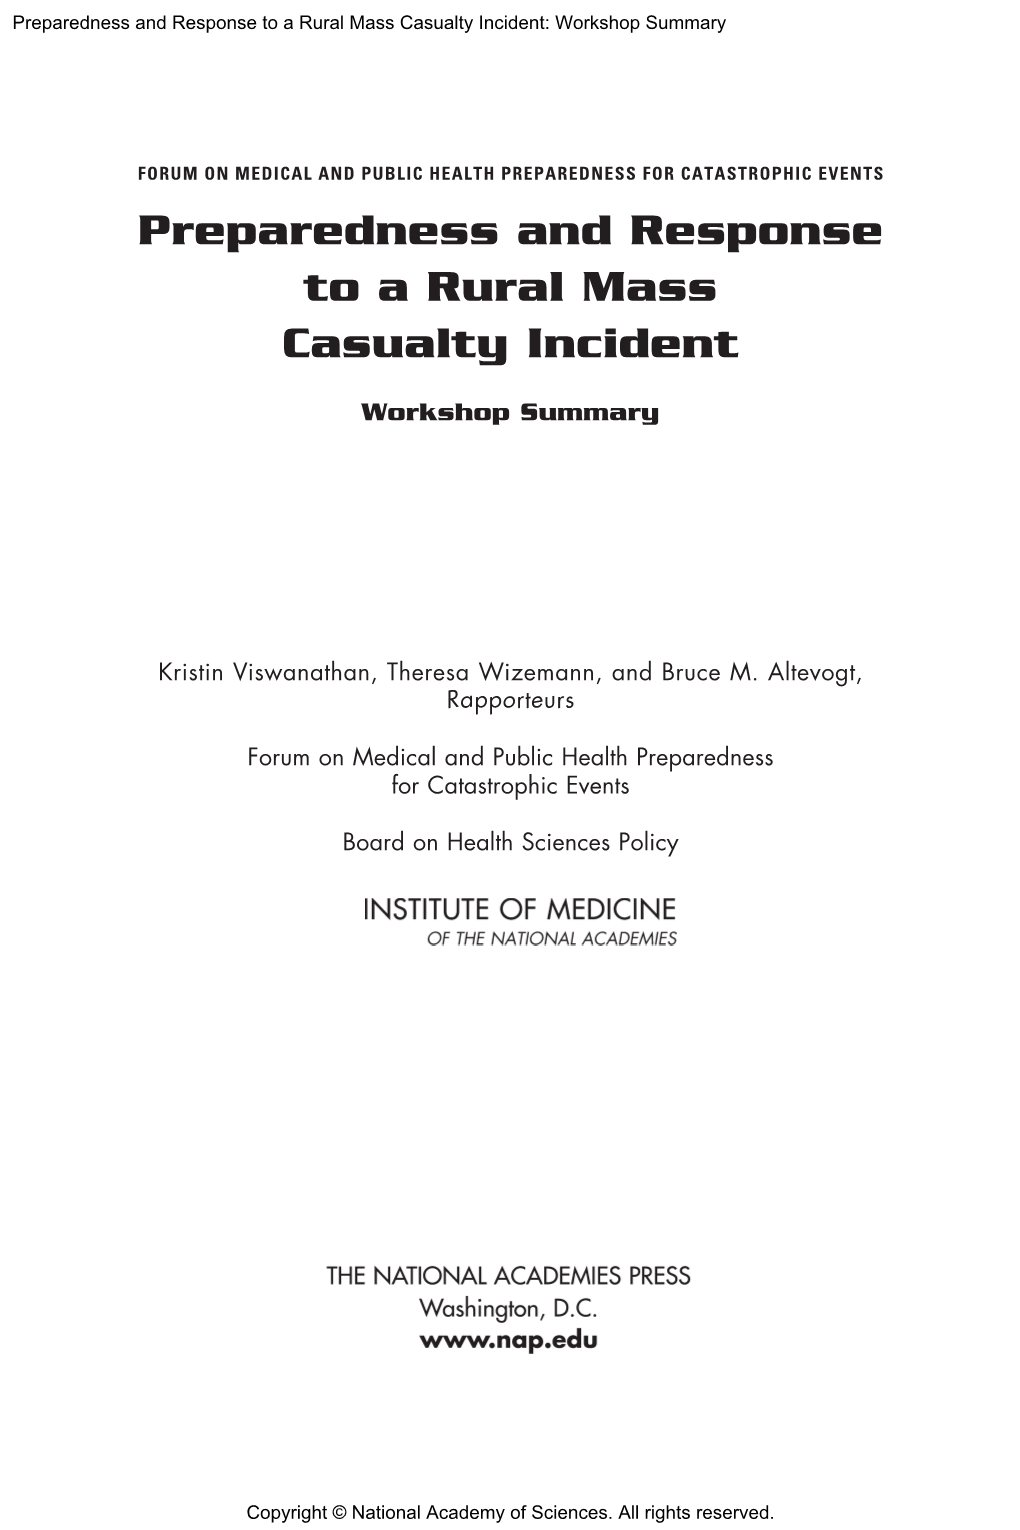 Preparedness and Response to a Rural Mass Casualty Incident: Workshop Summary